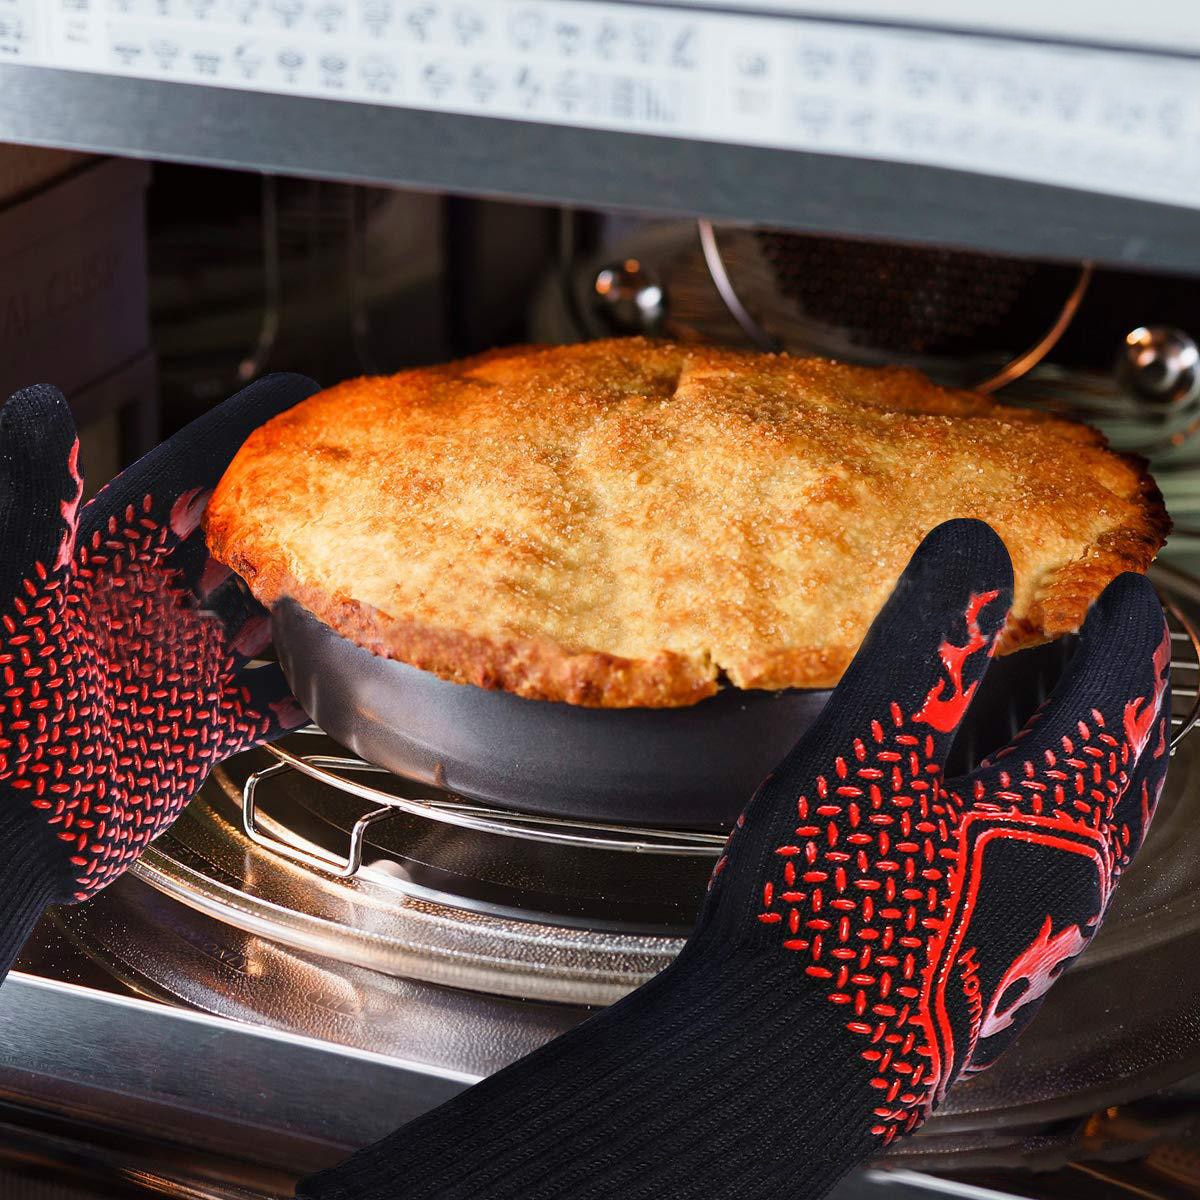 Extreme Heat-Resistant BBQ and Oven Gloves for Ultimate Kitchen Safety - Reversible, Washable, and Universally Sized Extreme Heat-Resistant BBQ and Oven Gloves are a kitchen essential for all cooking enthusiasts. Whether you're grilling up a storm at your backyard barbecue, baking a fresh batch of cookies, or handling hot pots and pans on the stove, these gloves have got you covered. With their universal size, these gloves fit both left and right hands, making them a versatile choice for any home chef. The extreme heat resistance of up to 800 degrees Celsius (for 10-15 seconds) ensures your hands are protected from scorching heat, and the 5.8-inch cuff keeps your wrists and lower forearms safe from burns when removing hot cookware from the oven. 🔥 Extreme Heat Resistance: With a thick natural cotton lining and outer aramid silicone, these gloves can withstand temperatures of up to 800 degrees Celsius for short durations, keeping your hands safe during high-heat cooking. ♻️ Easy to Clean: These gloves are machine washable, making cleanup a breeze after your cooking adventures. 👫 Universal Size: Designed to fit all, our gloves are reversible and suitable for both left and right hands, ensuring they're easy to use for everyone in the family. Enhanced Flexibility: Five-Finger Design for Improved Handling of Hot Pots and Pans, Silicone Super-Grip Surface for Secure Grasp of Cooking and Grilling Utensils.